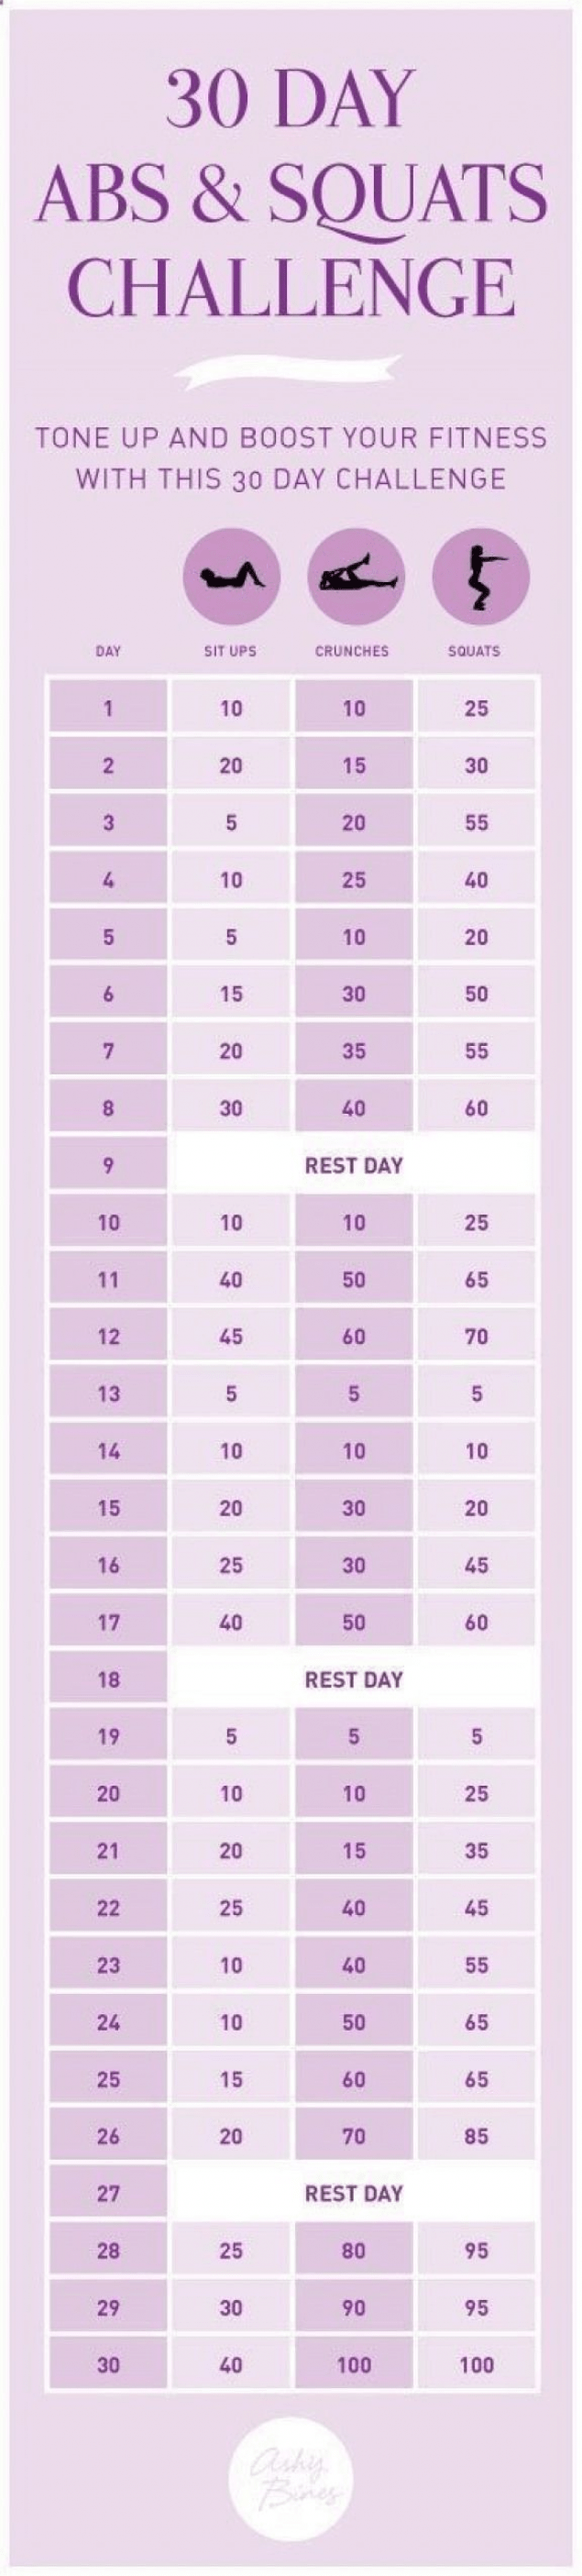 30 Day Abs & Squats Challenge